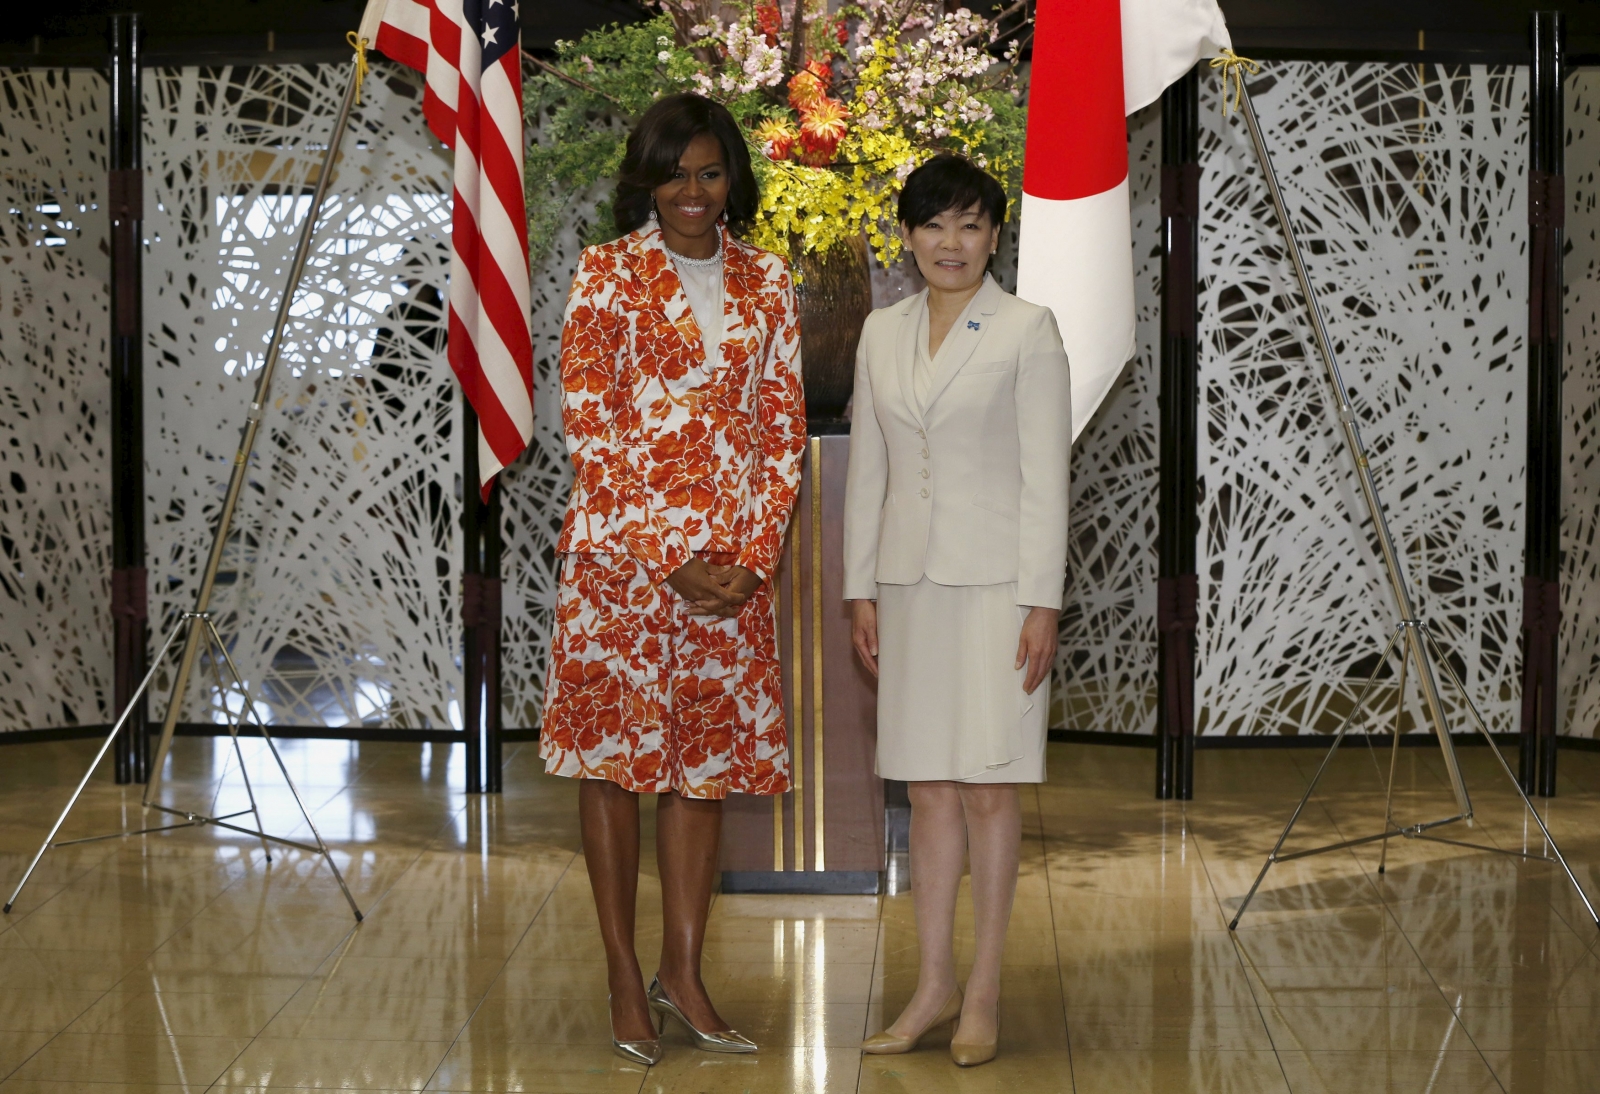 Michelle Obama pushes for girls' education in Japan1600 x 1094